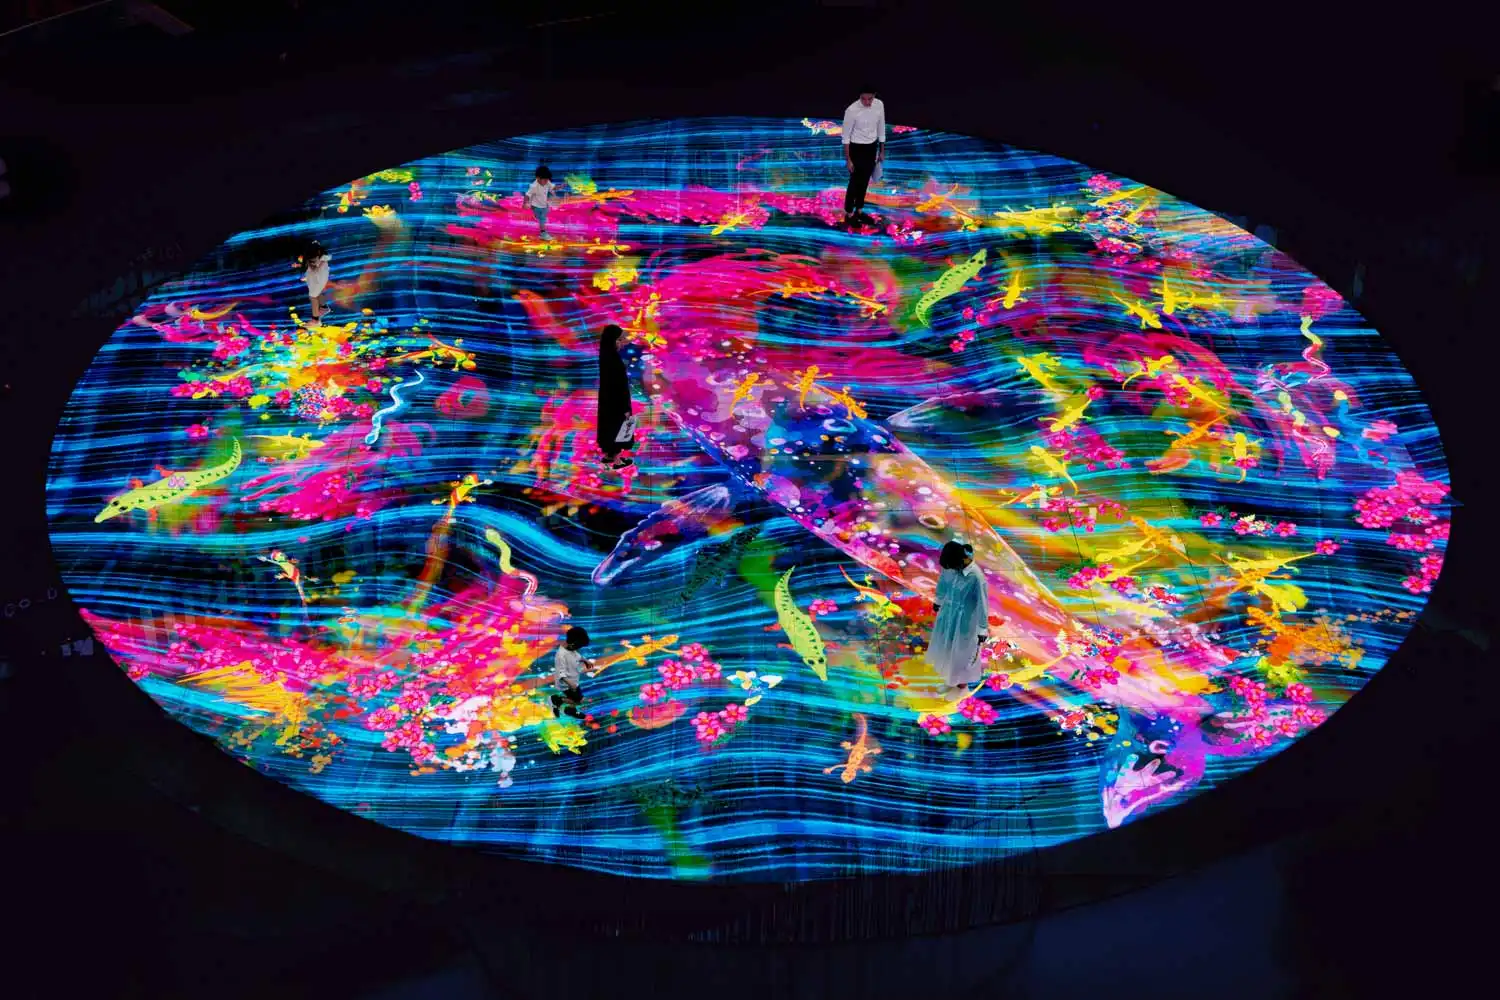 Digital Light Canvas in Singapore - Immersive Experience